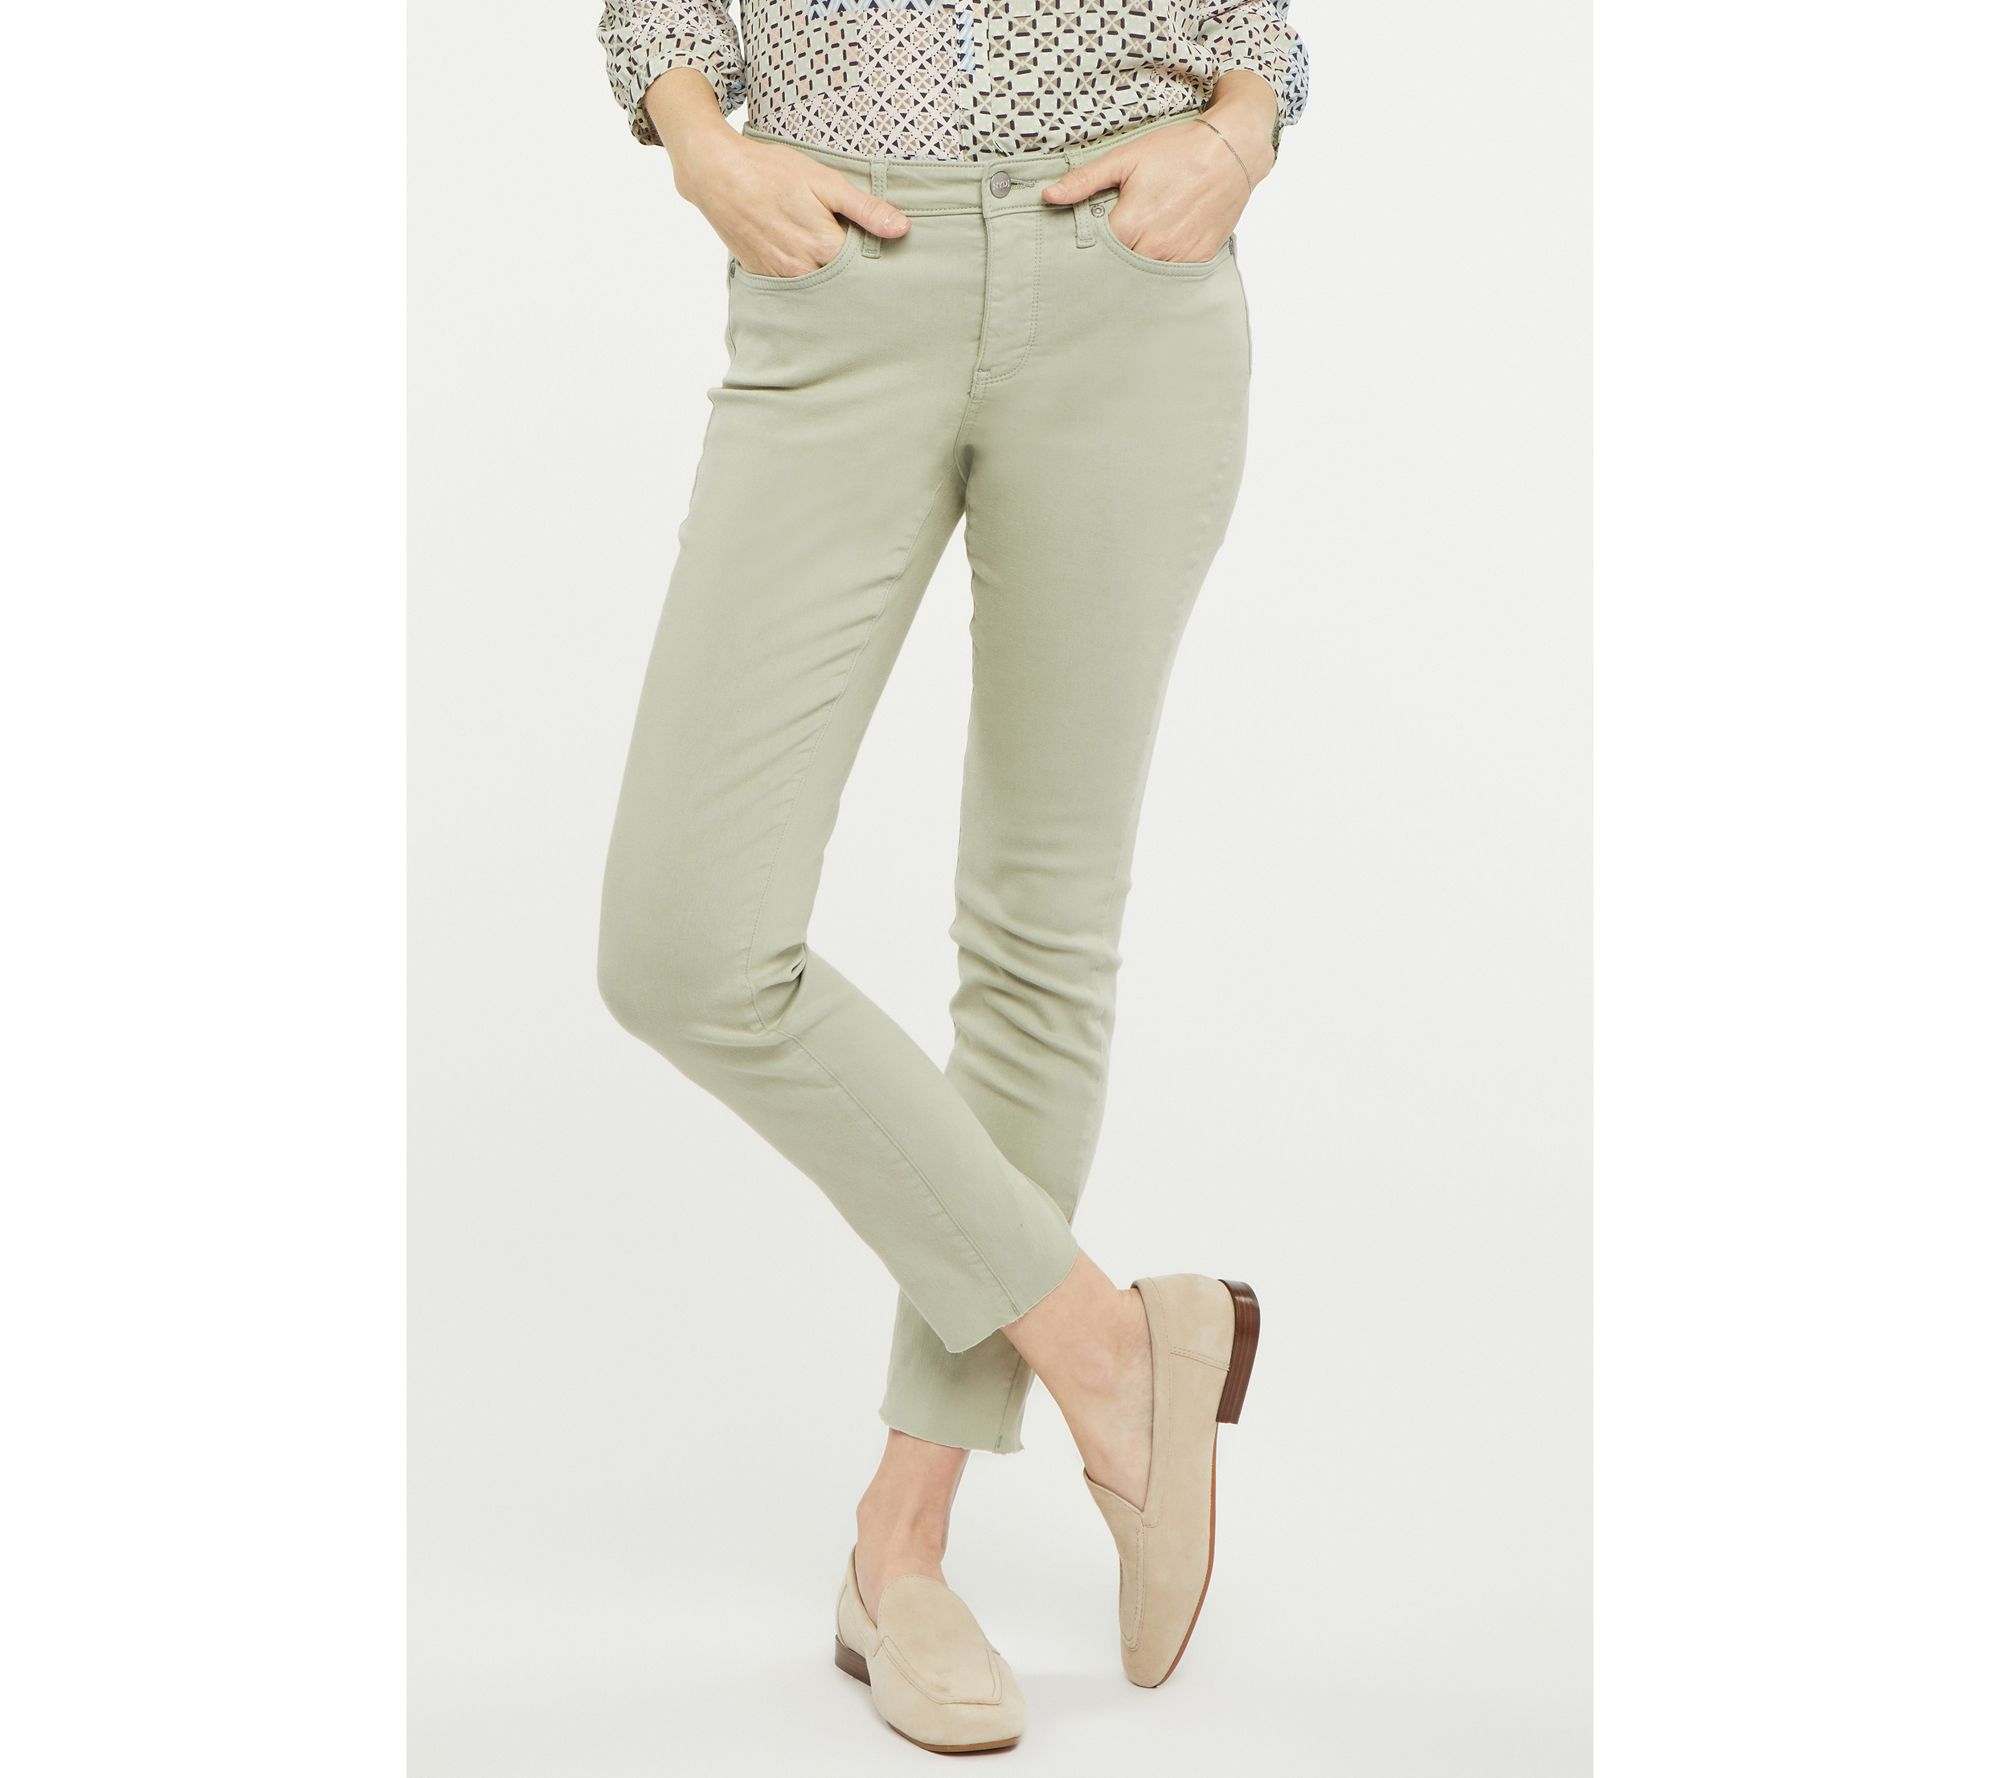 NYDJ Alina Ankle Jeans with Raw Hems in ColoredDenim - QVC.com